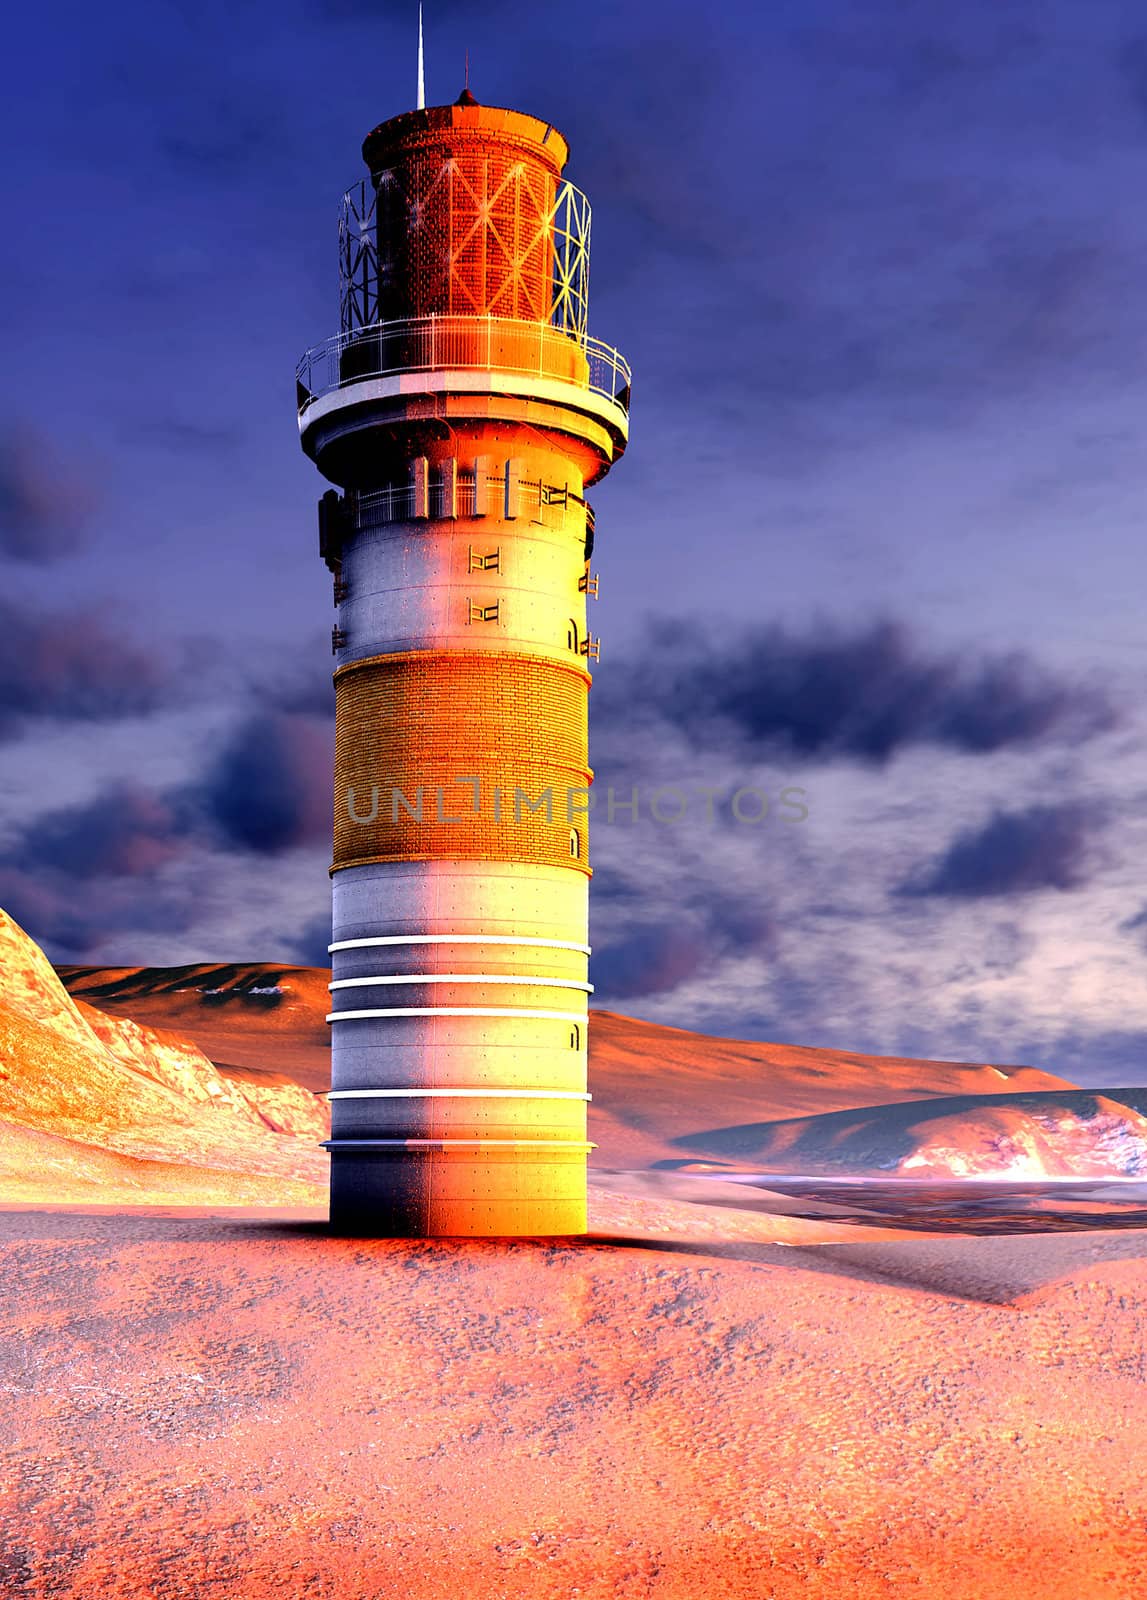 lighthouse by the ocean at sunset by andromeda13